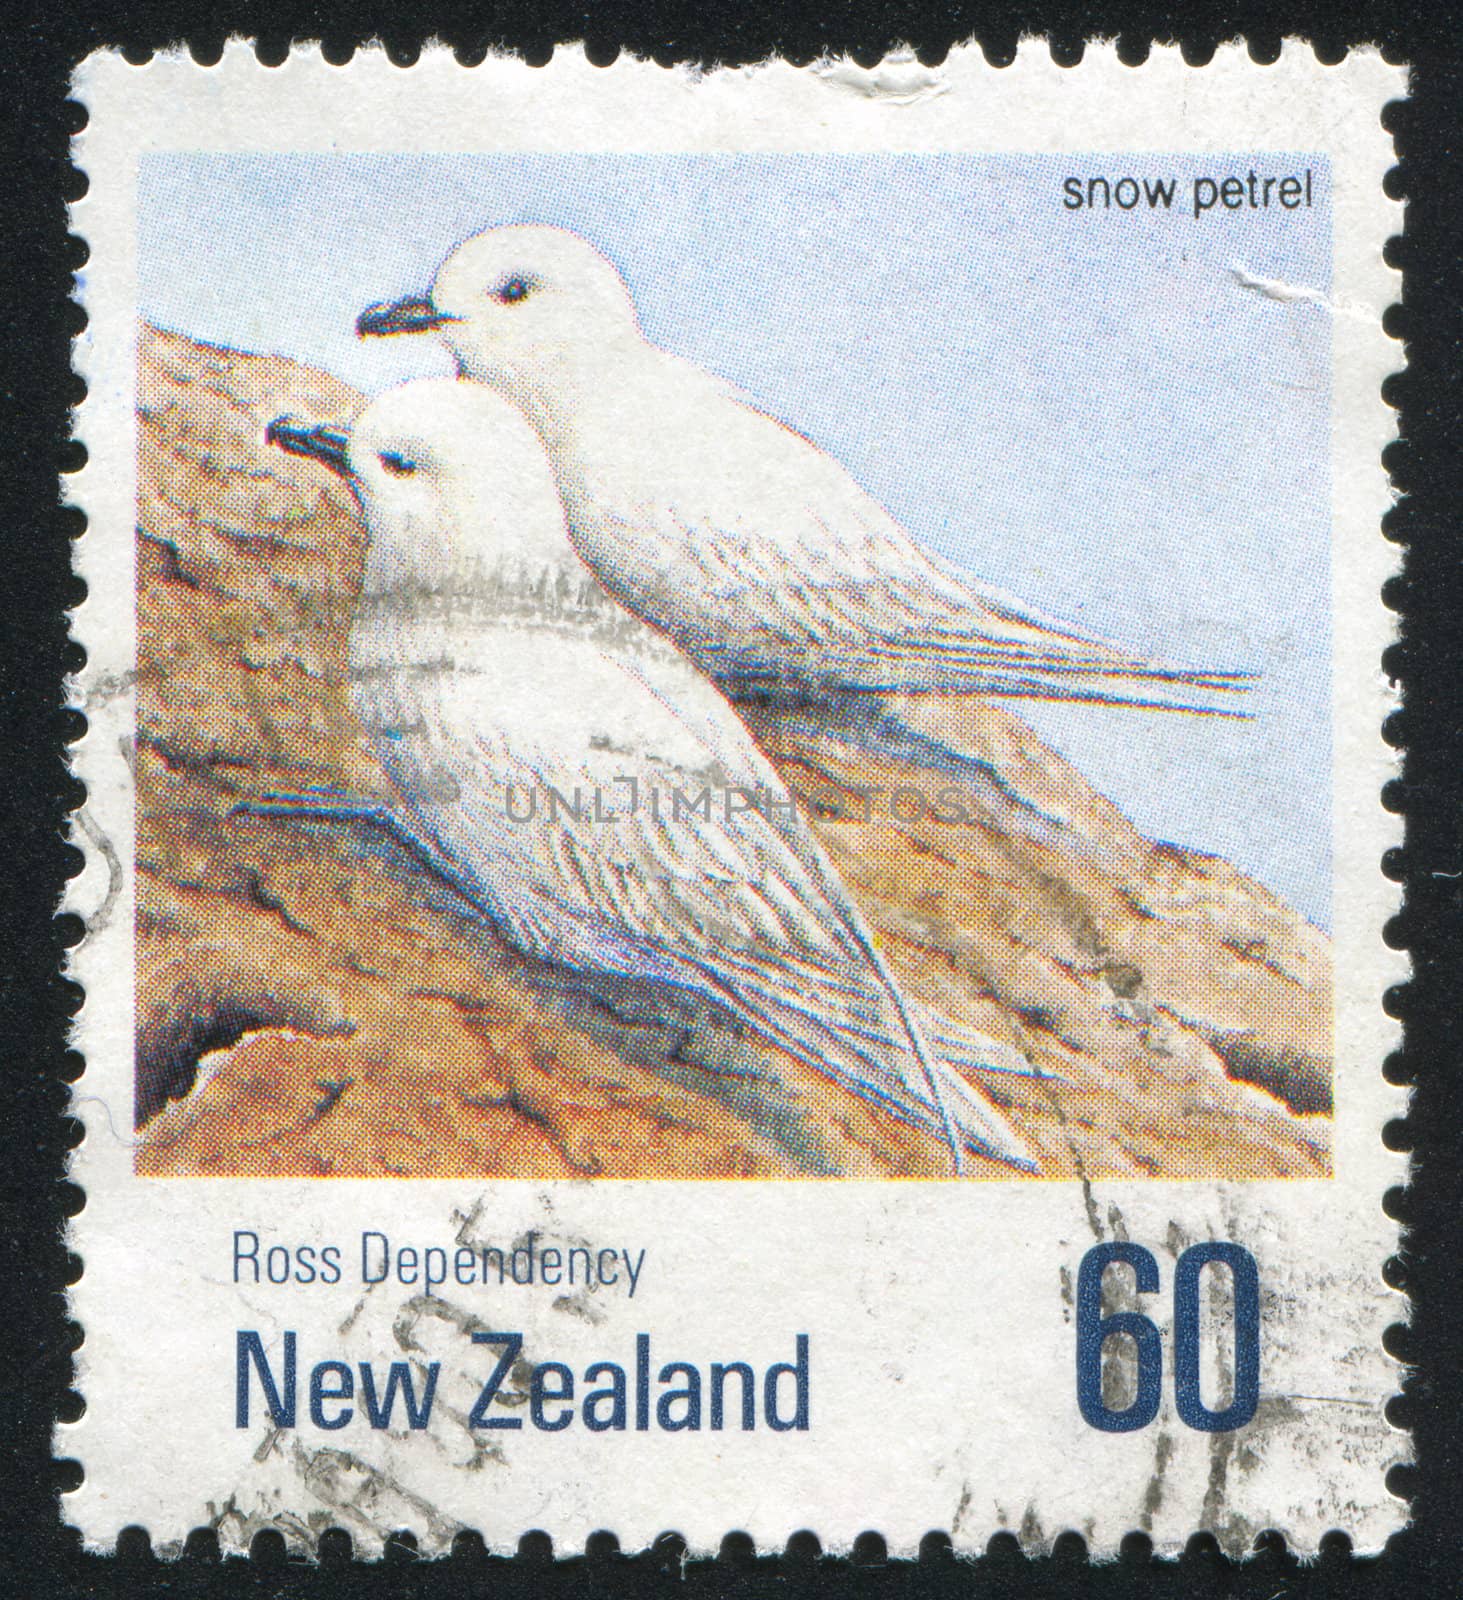 snow petrel by rook